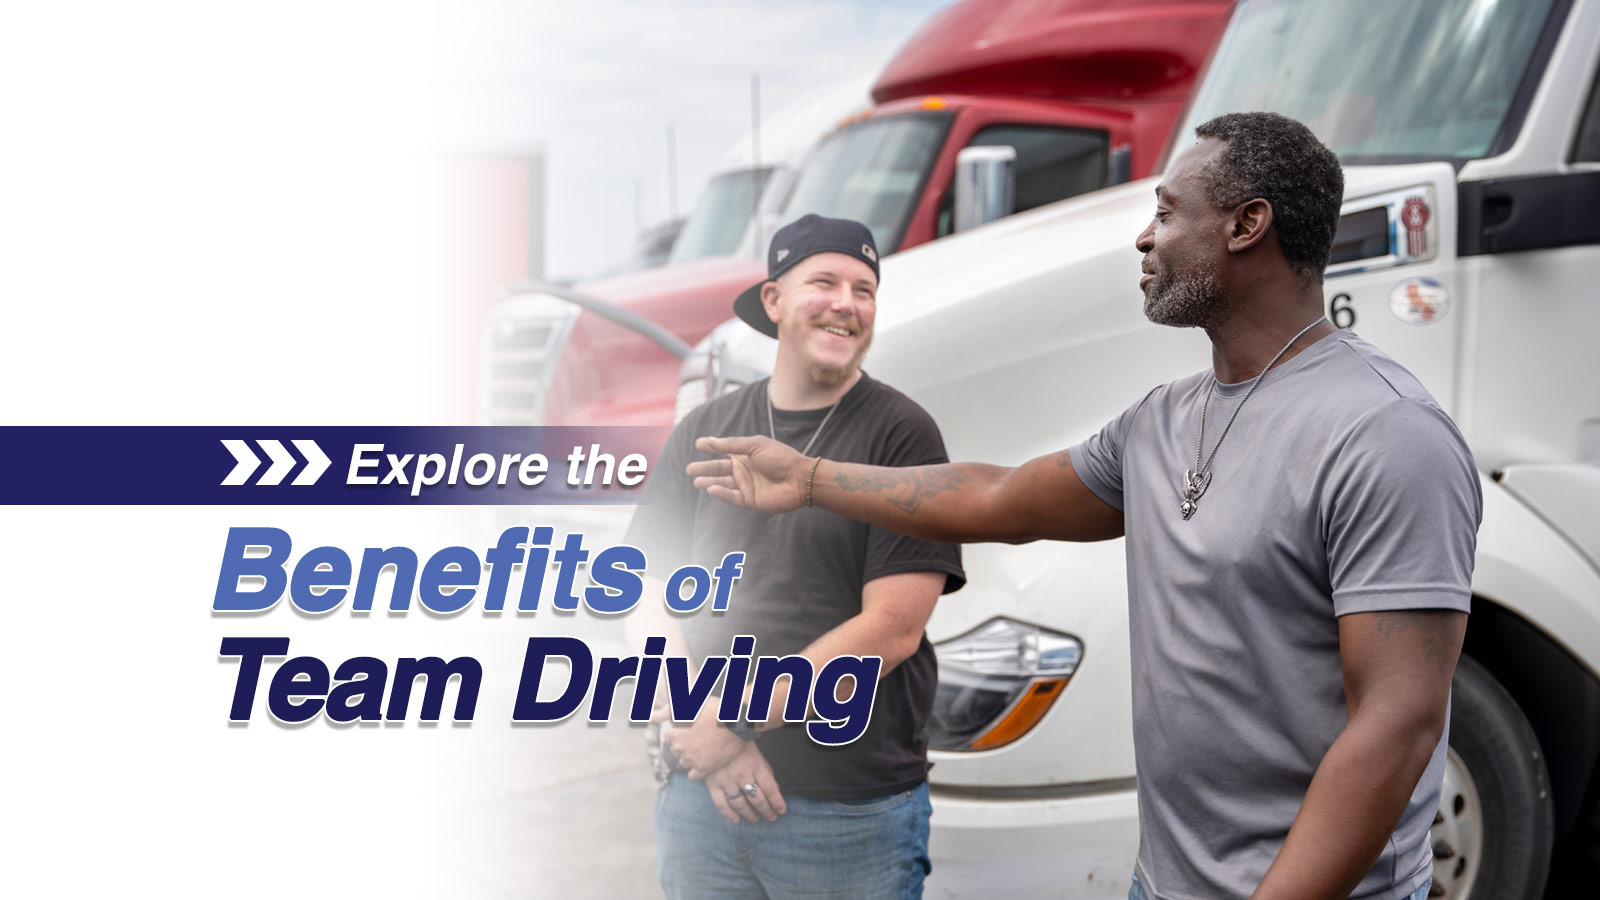 Explore the Benefits of Team Driving